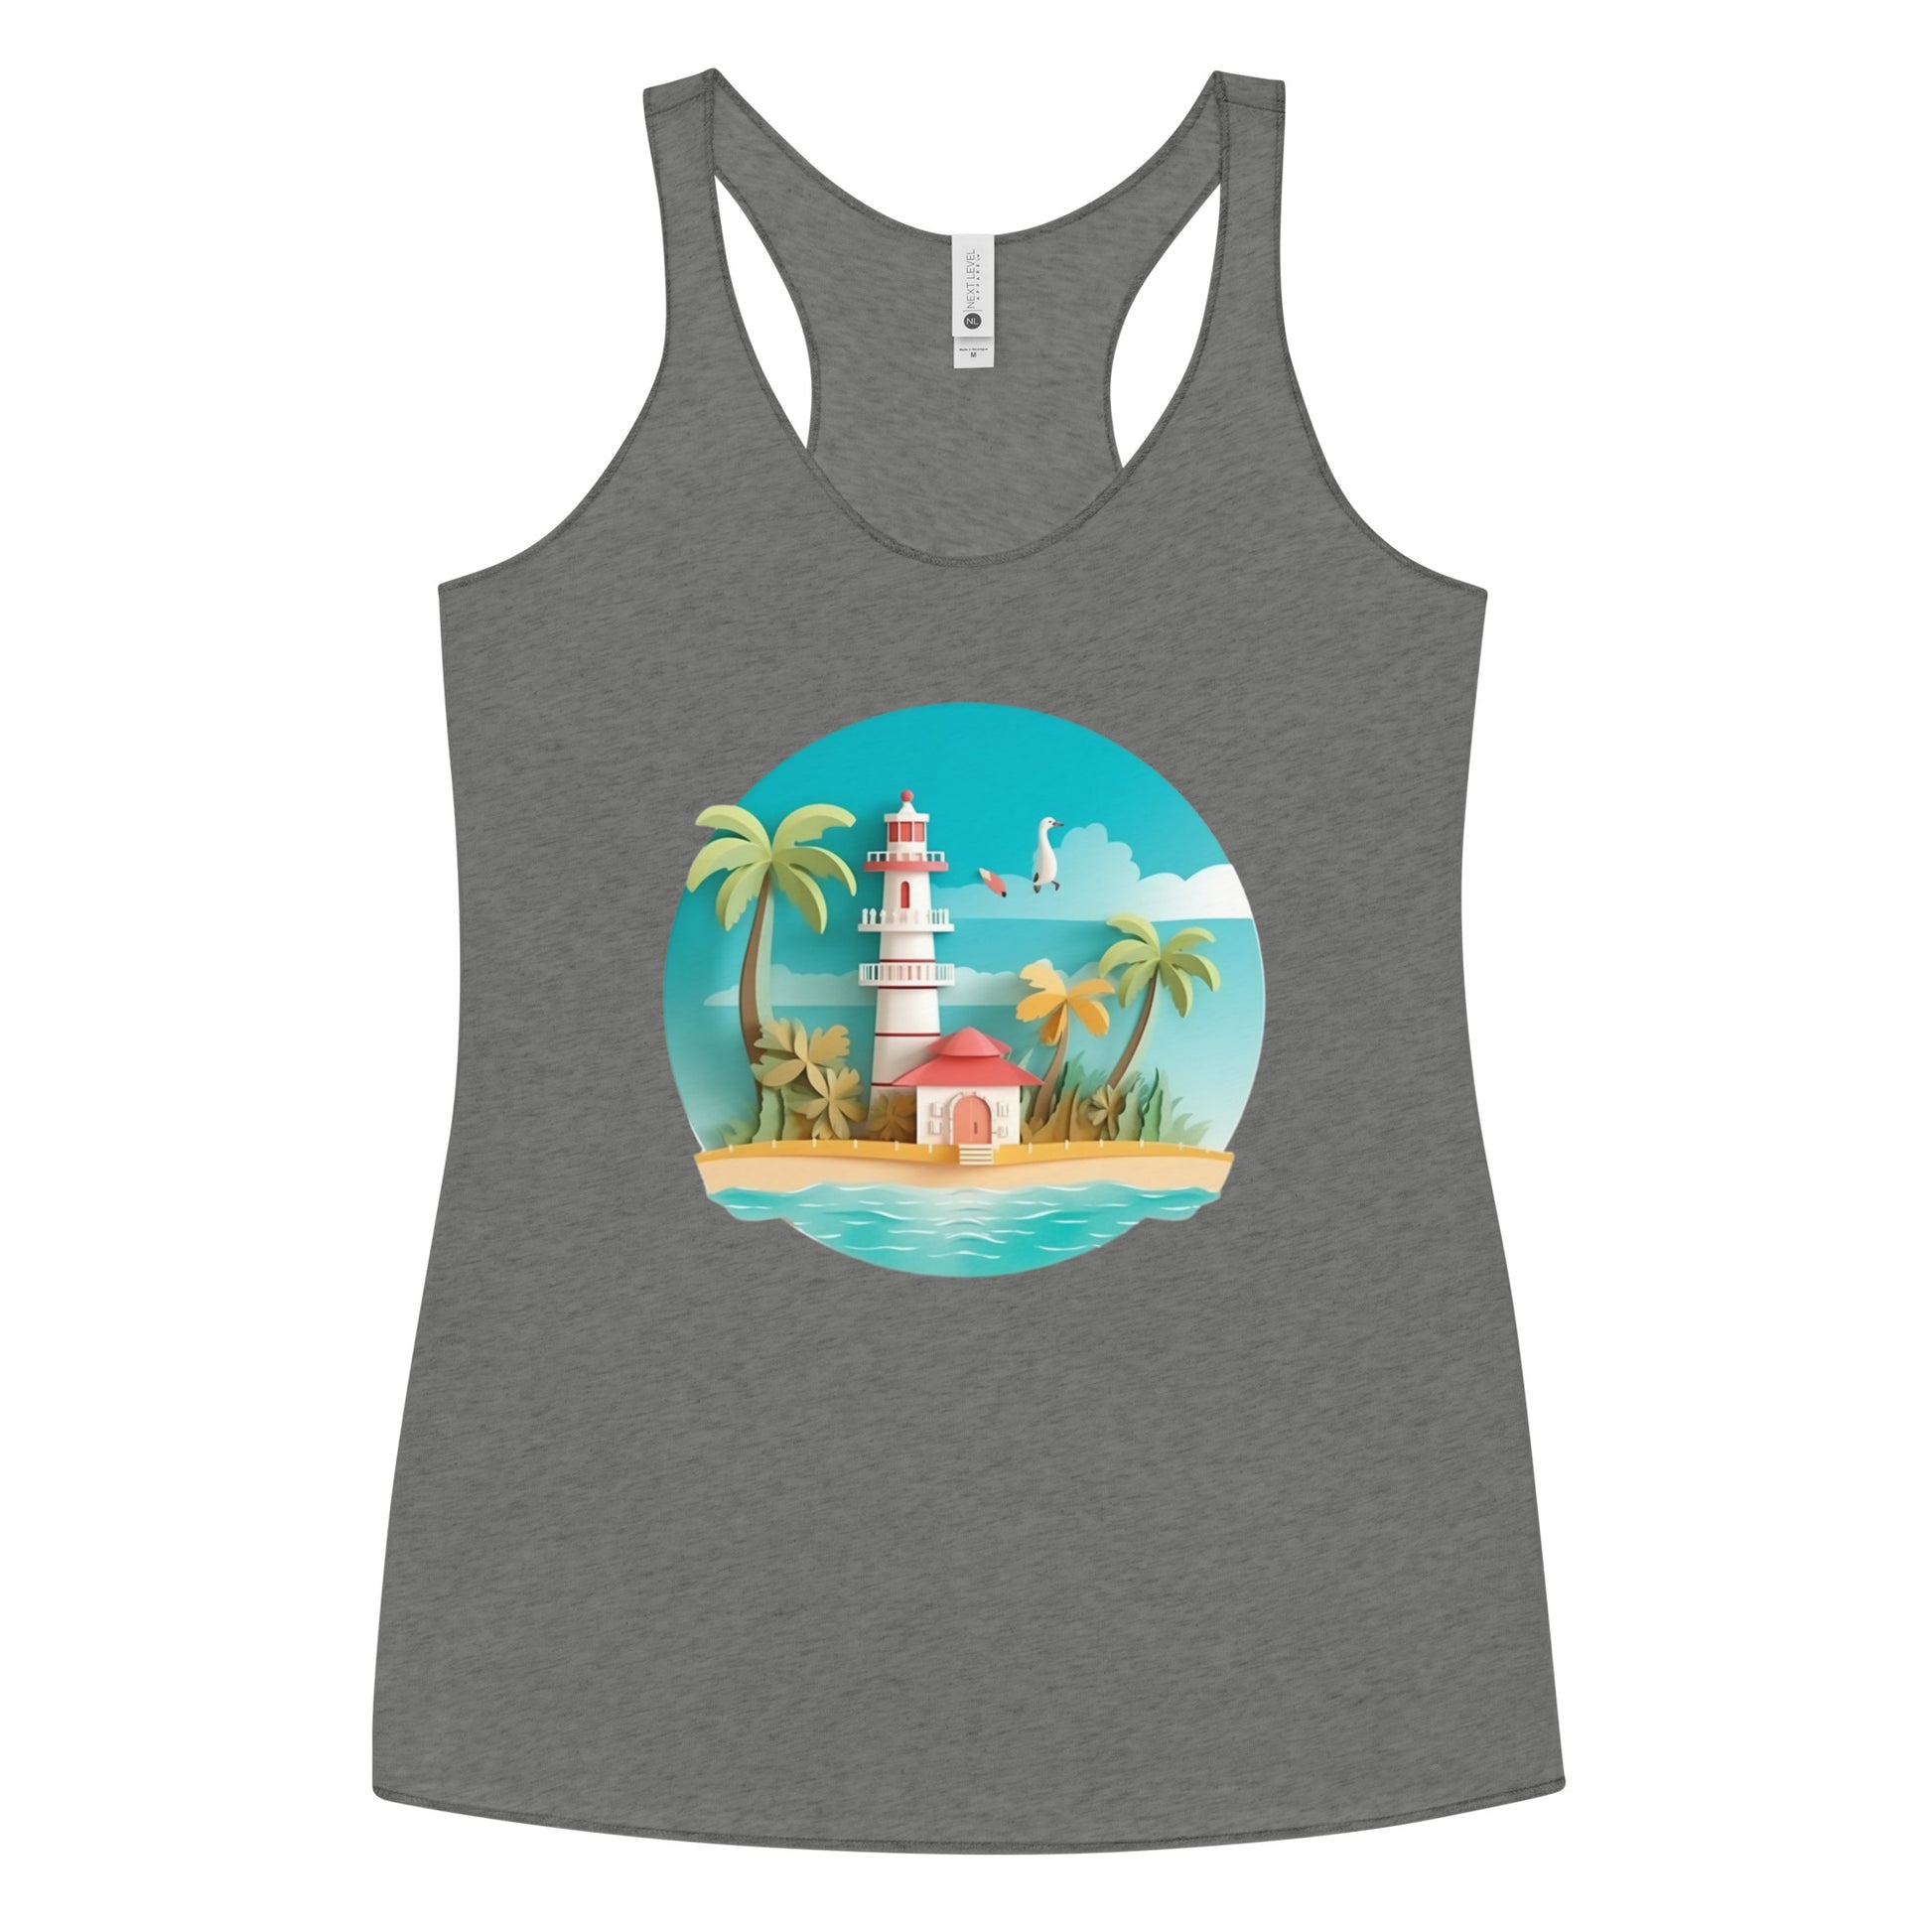 Grey tank top with picture of lighthouse and palm trees